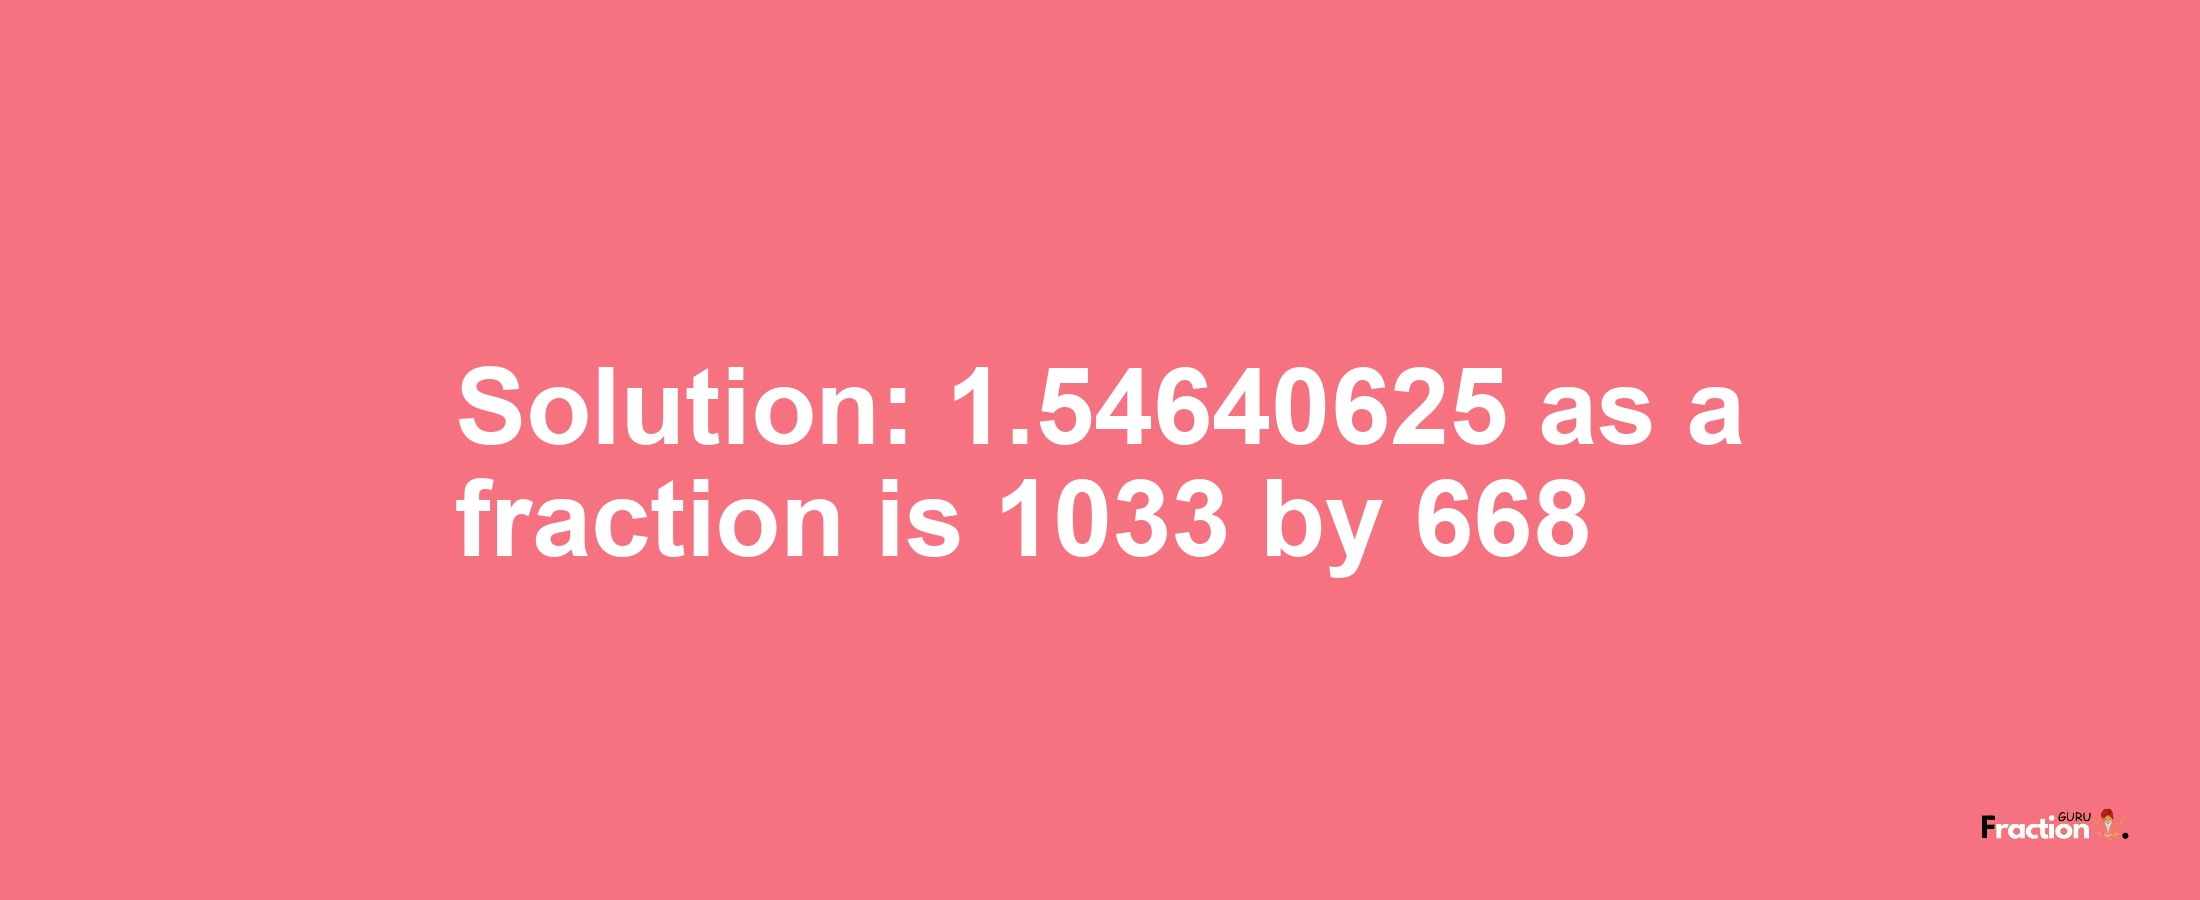 Solution:1.54640625 as a fraction is 1033/668